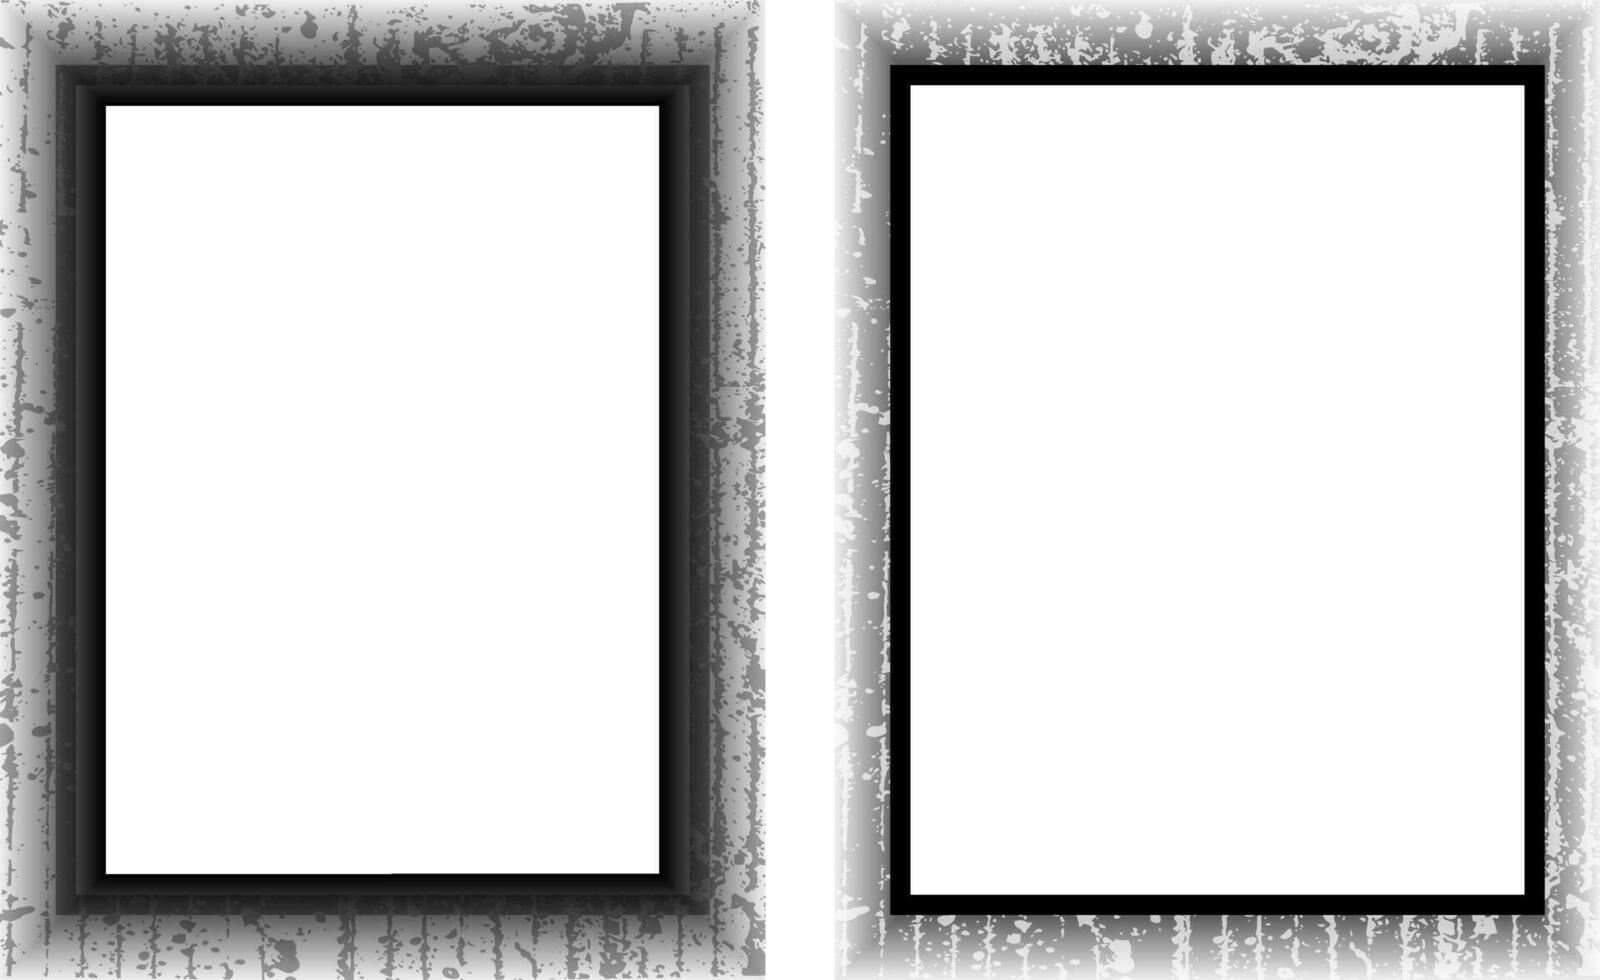 grunge frame with square frame vector, Black and white Grunge photo frame, Grunge border background. Abstract vintage grunge round stock brush album element, square vector template old photo frame